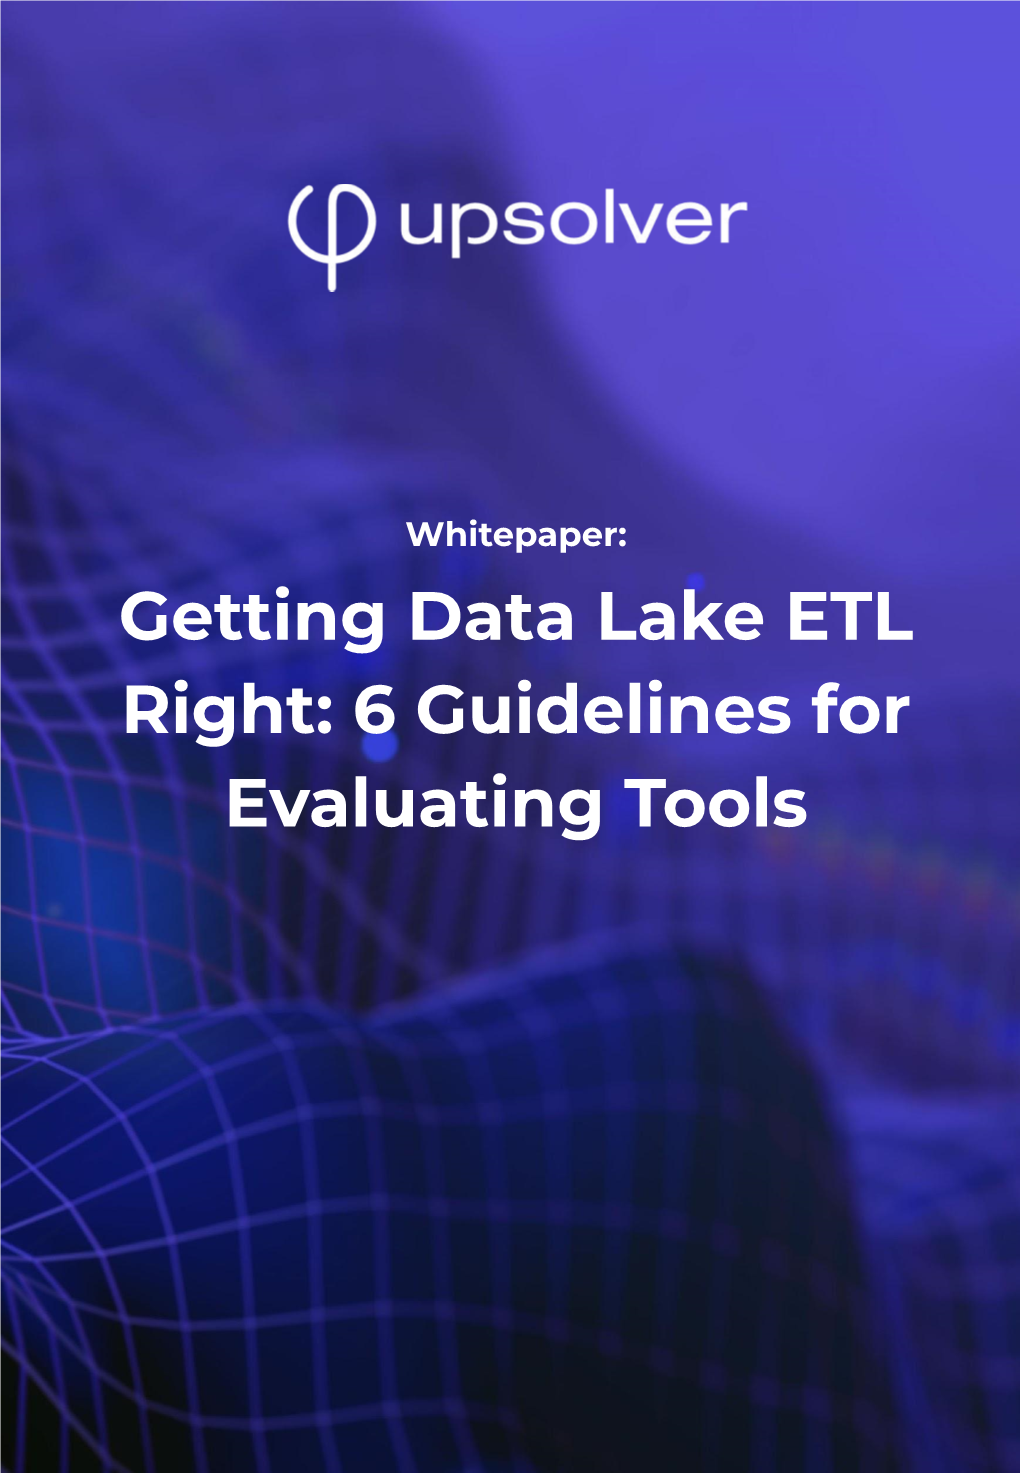 Getting Data Lake ETL Right: 6 Guidelines for Evaluating Tools